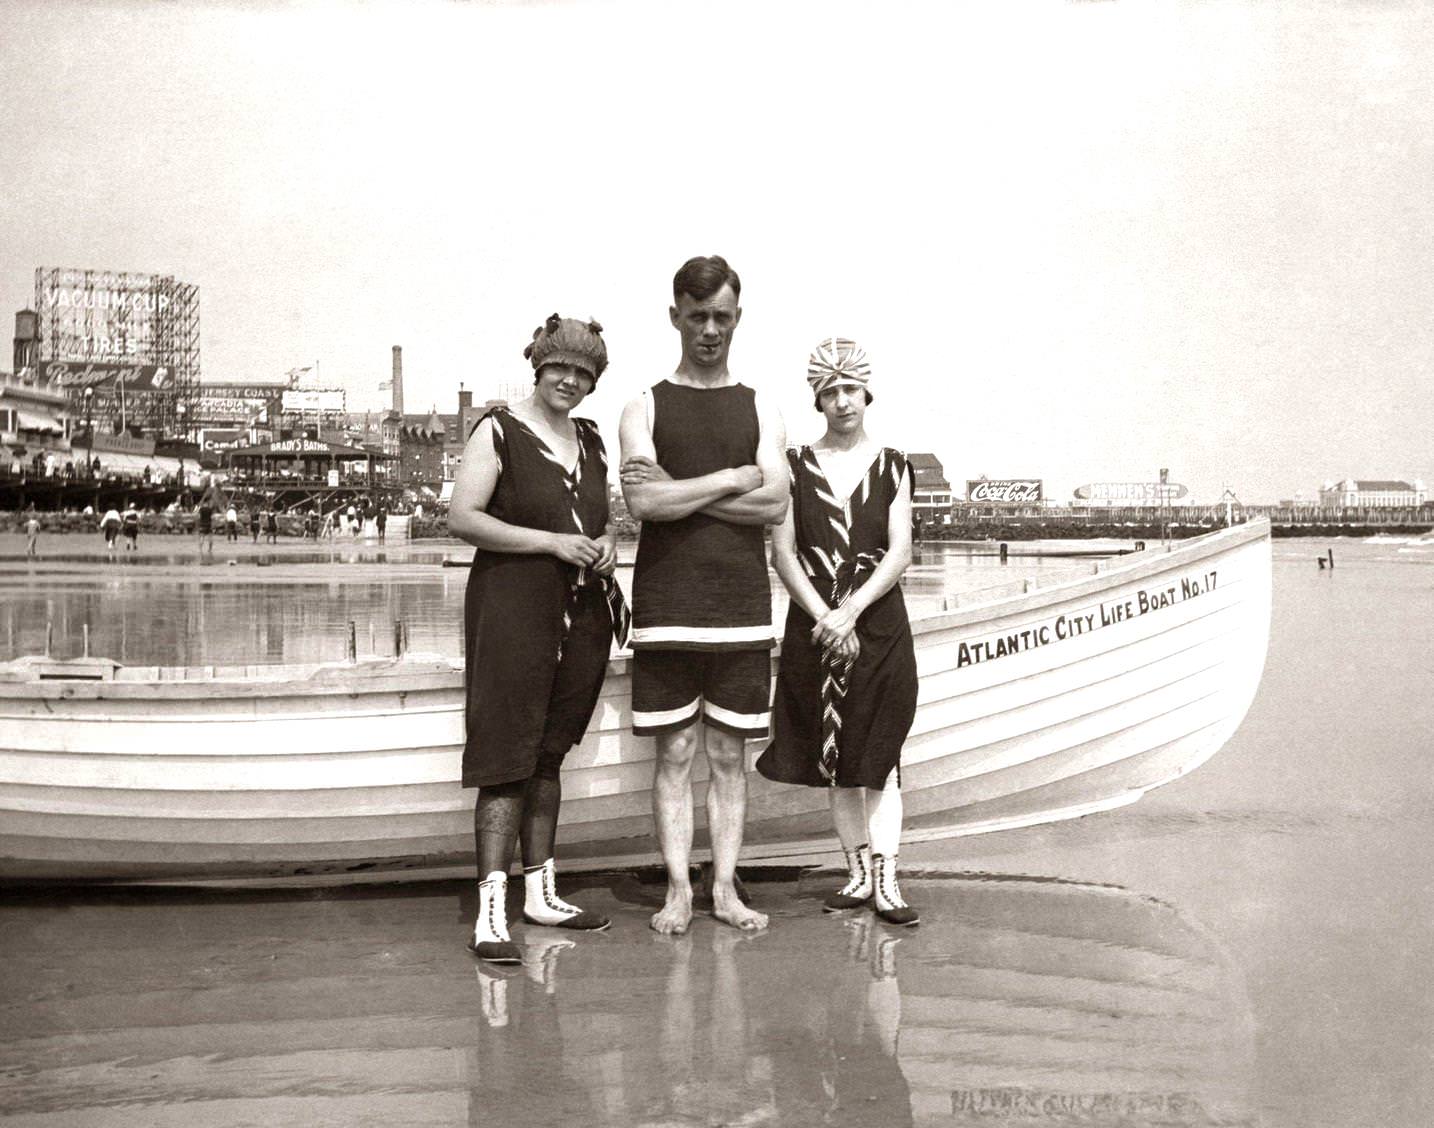 Man and two Women Posing in Bathing Suits, Atlantic City, 1925